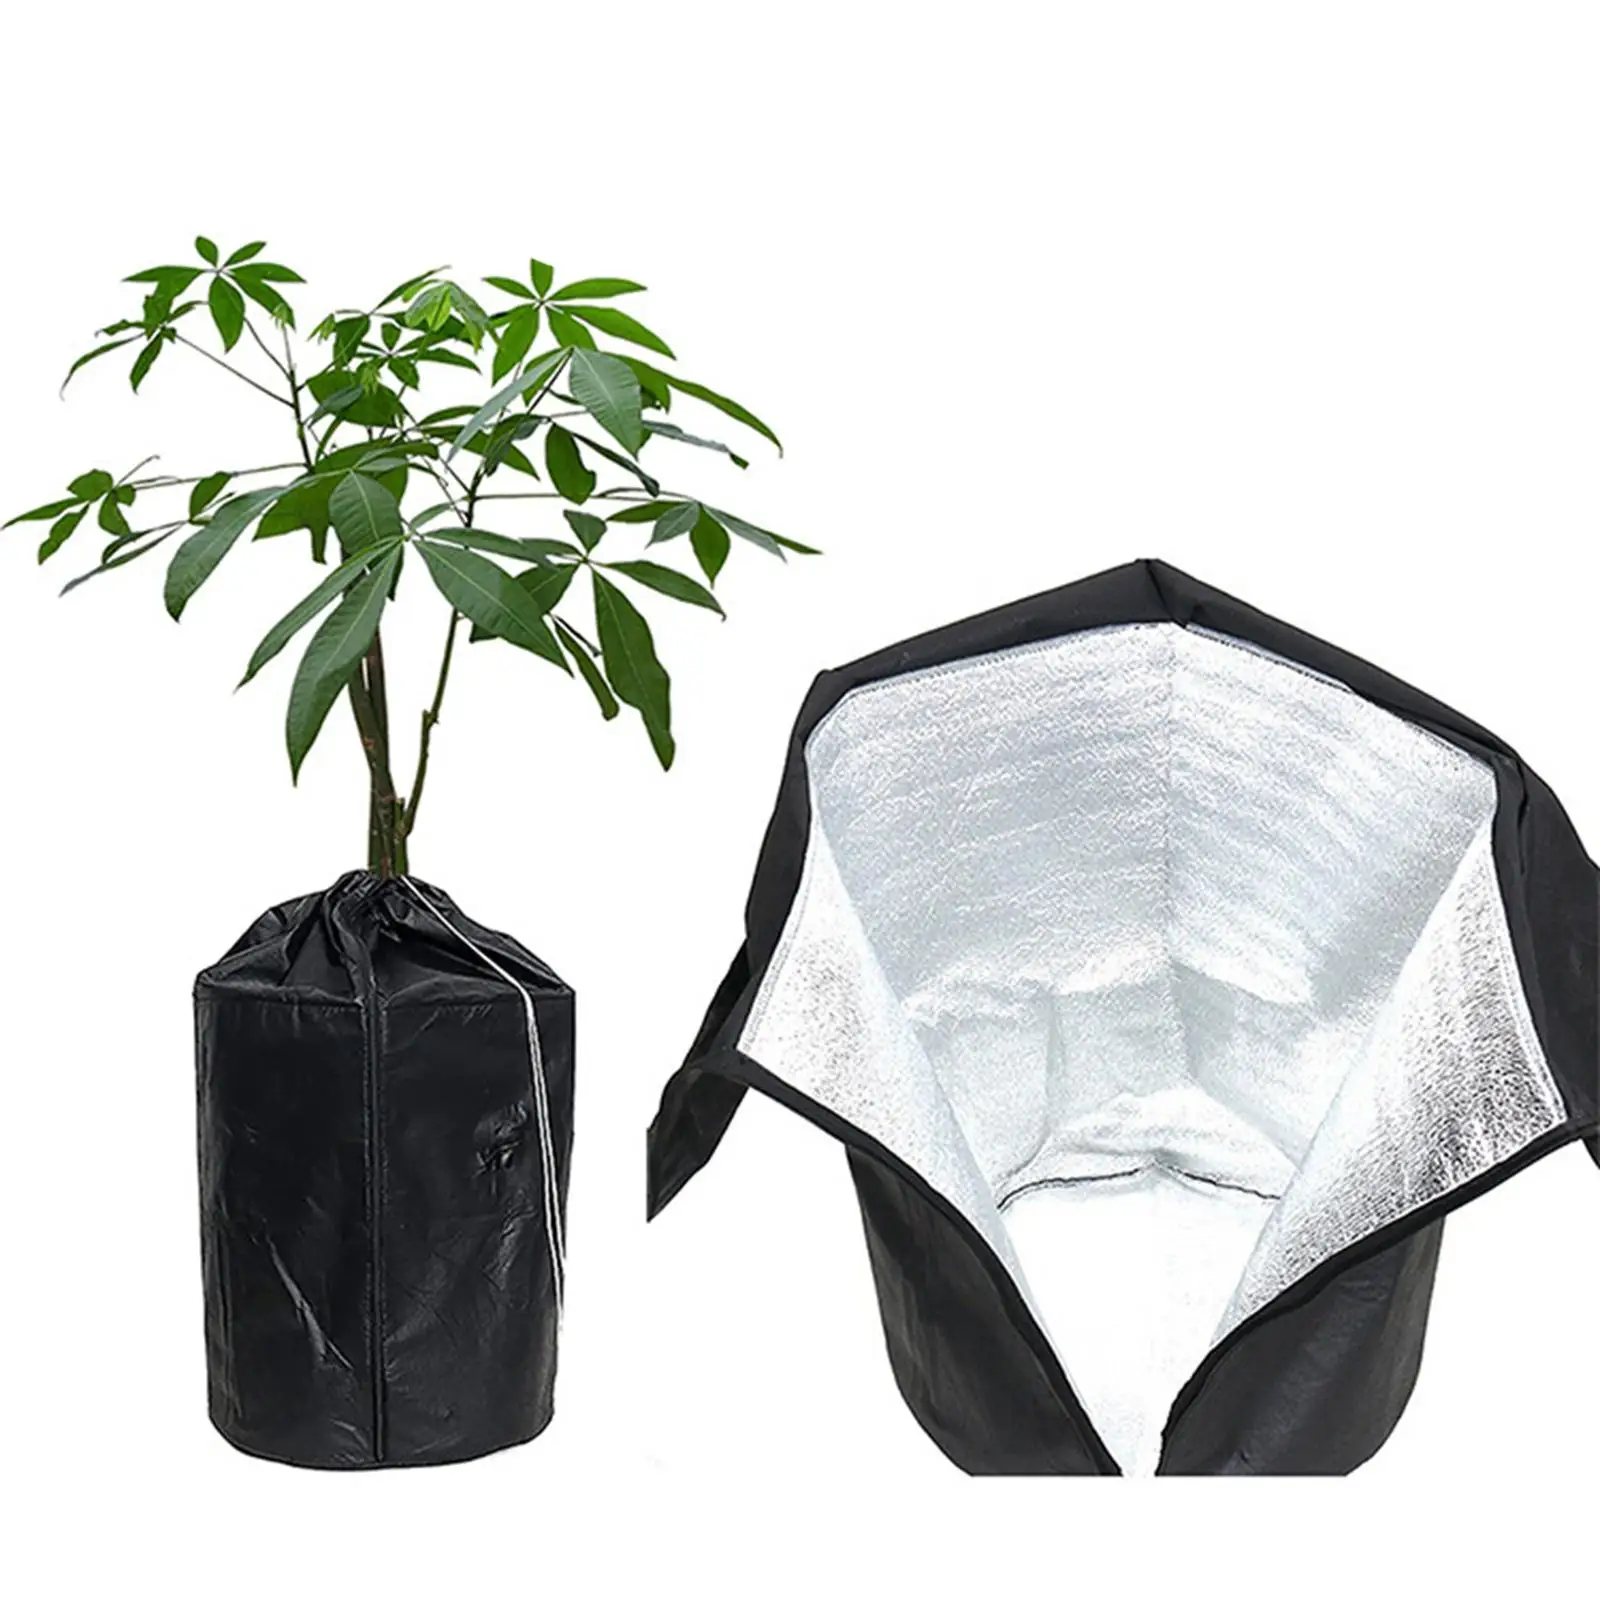 Winter Shrub Cover Reusable Breathable Frost Protection Cover for Garden Indoor